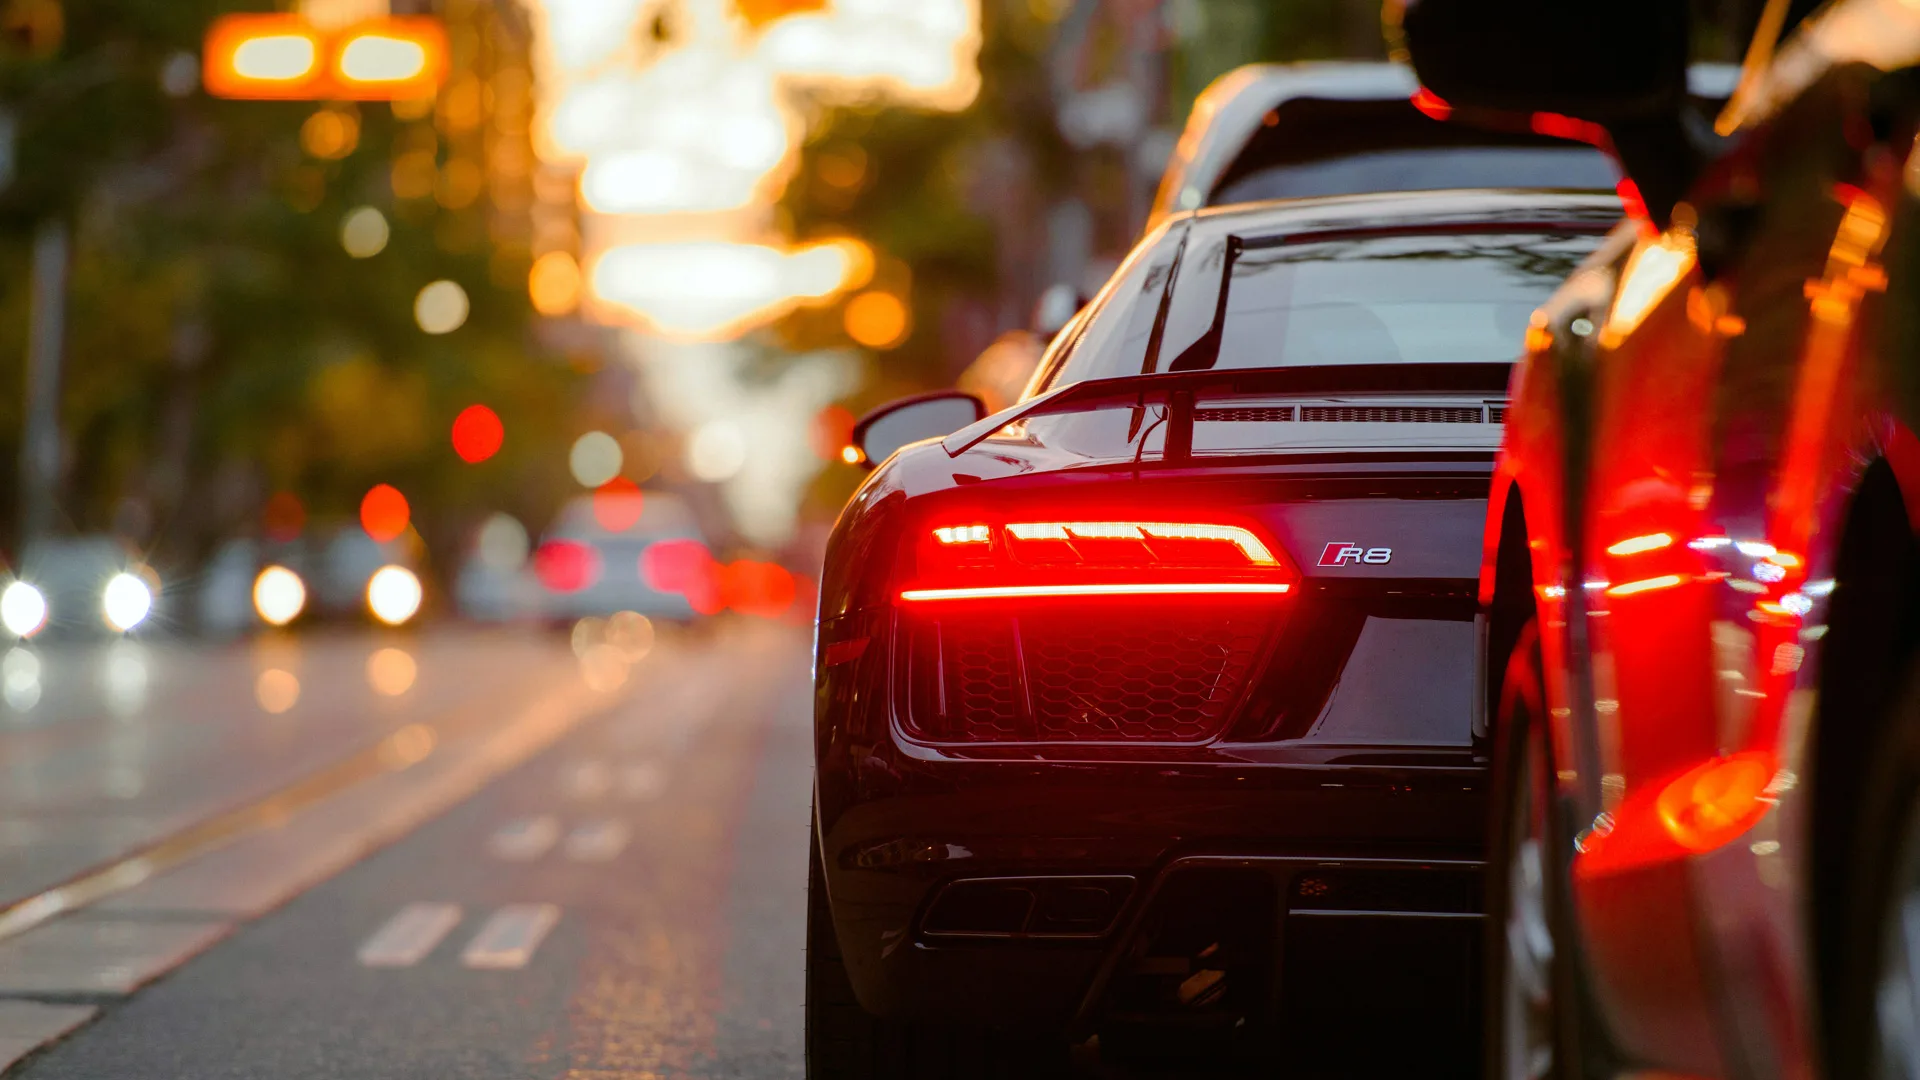 A photograph of the back of a sports car with the red brake lights on against a blurred shot of the road with car lights